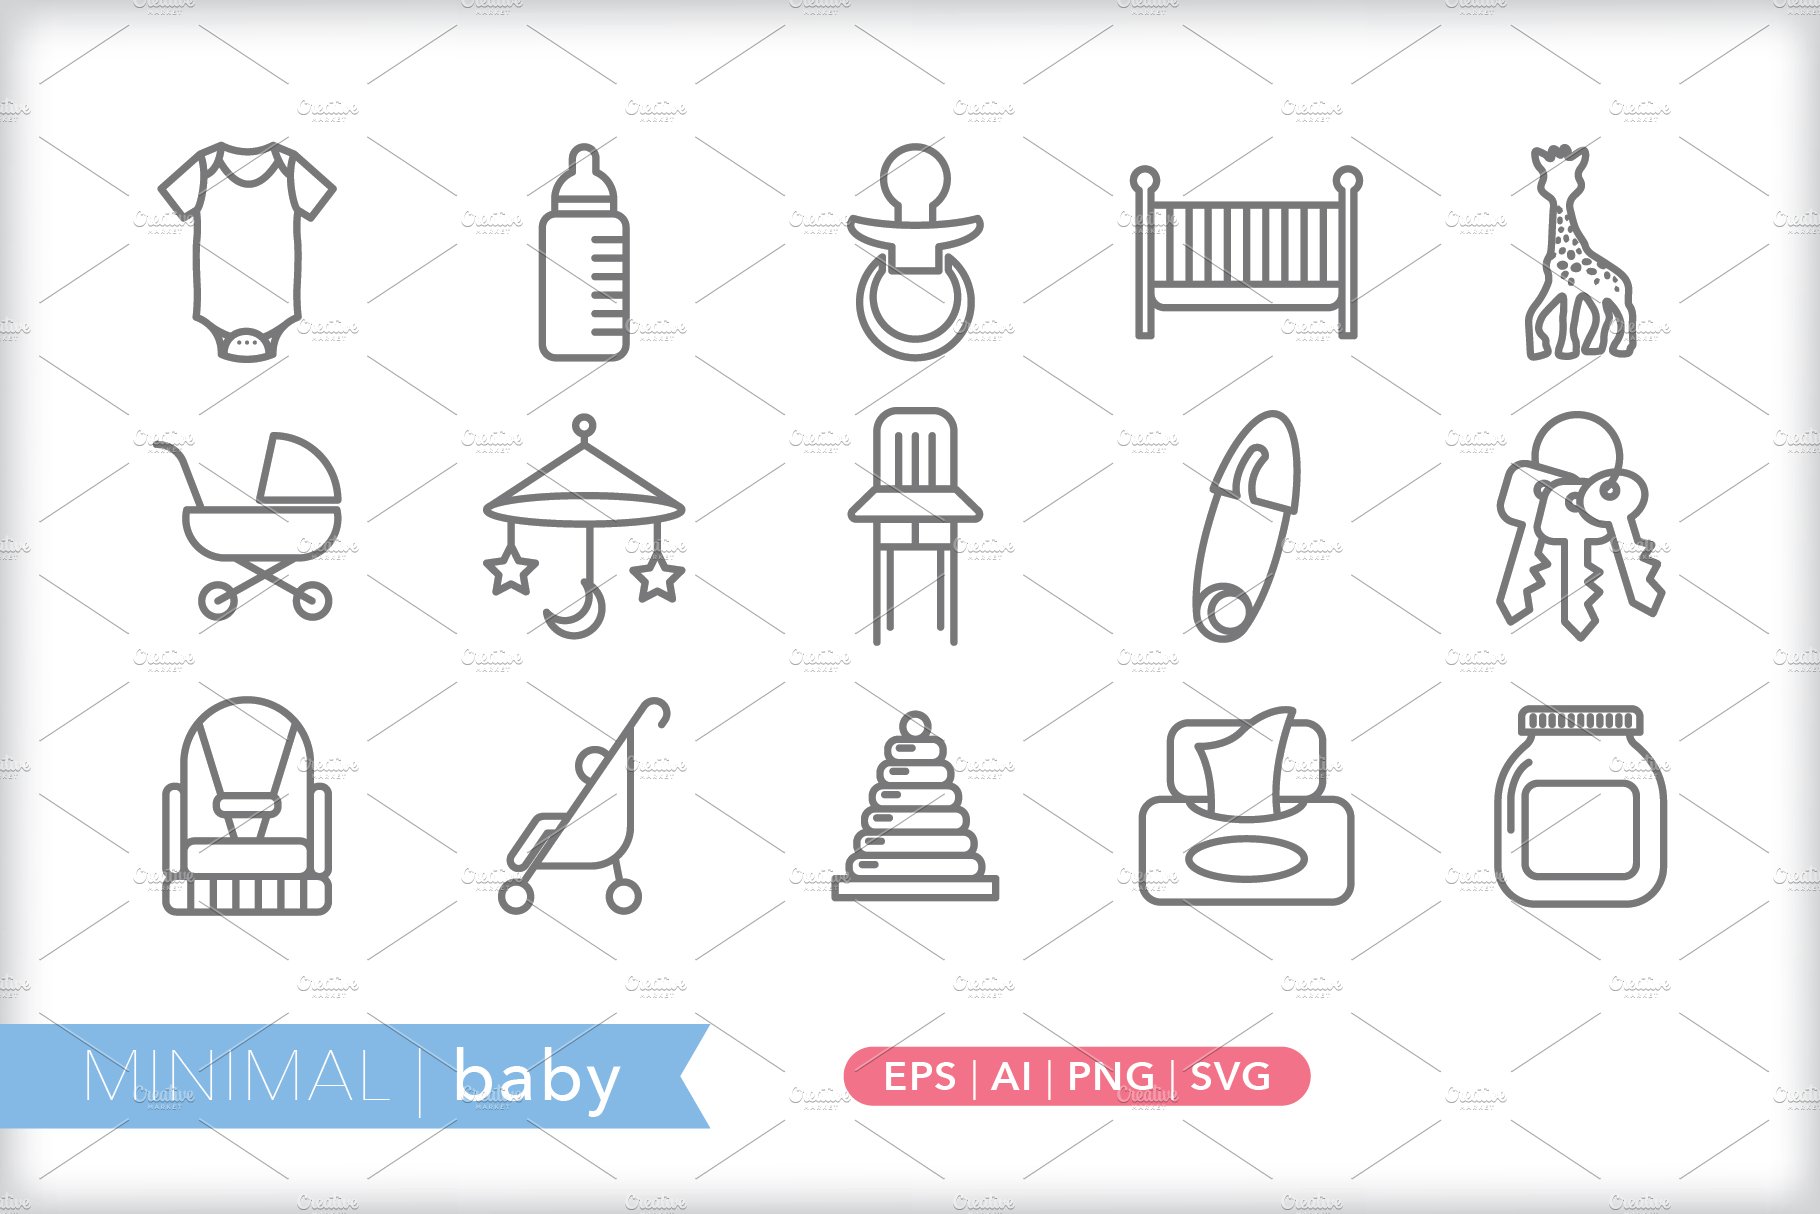 Minimal baby icons cover image.